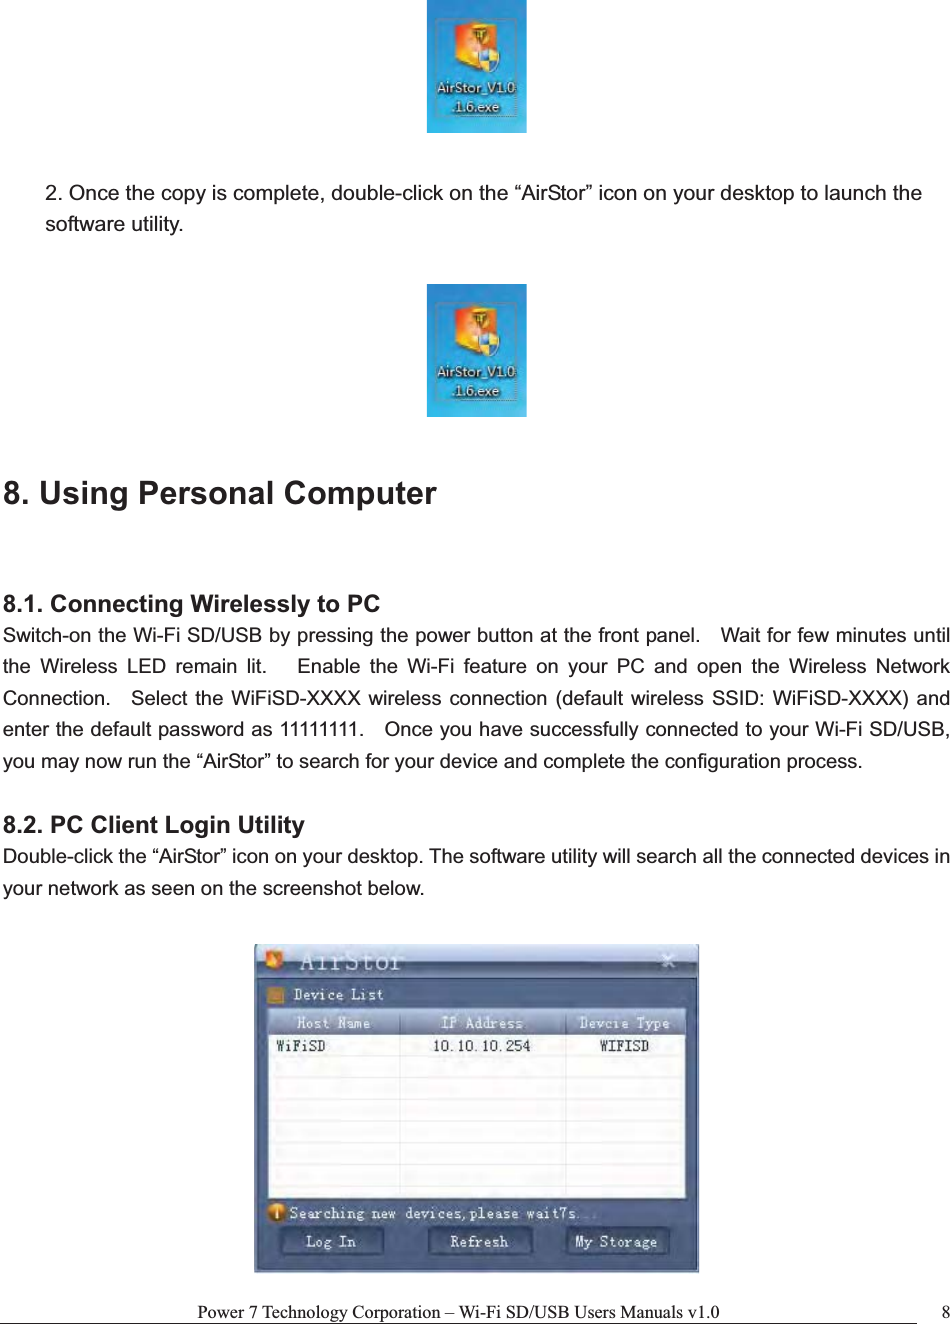 Power 7 Technology Corporation – Wi-Fi SD/USB Users Manuals v1.0  82. Once the copy is complete, double-click on the “AirStor” icon on your desktop to launch the software utility. 8. Using Personal Computer 8.1. Connecting Wirelessly to PC Switch-on the Wi-Fi SD/USB by pressing the power button at the front panel.    Wait for few minutes until the Wireless LED remain lit.   Enable the Wi-Fi feature on your PC and open the Wireless Network Connection.  Select the WiFiSD-XXXX wireless connection (default wireless SSID: WiFiSD-XXXX) and enter the default password as 11111111.    Once you have successfully connected to your Wi-Fi SD/USB, you may now run the “AirStor” to search for your device and complete the configuration process. 8.2. PC Client Login Utility Double-click the “AirStor” icon on your desktop. The software utility will search all the connected devices in your network as seen on the screenshot below. 